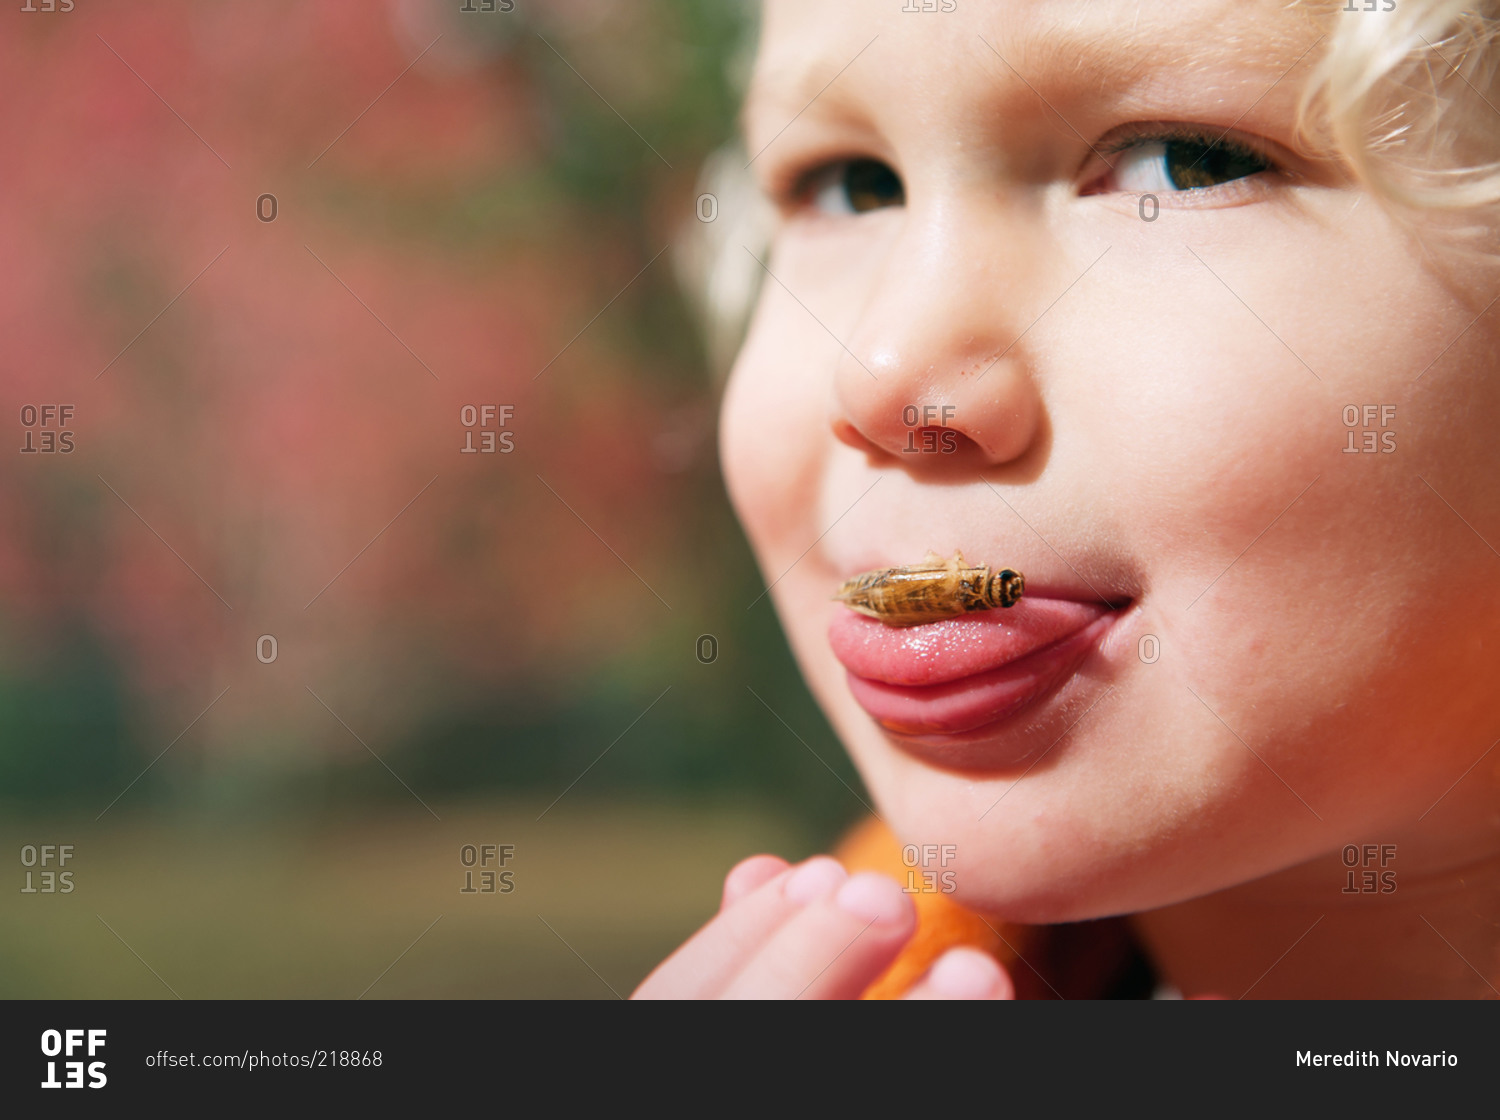 Young child holding a cricket on tongue